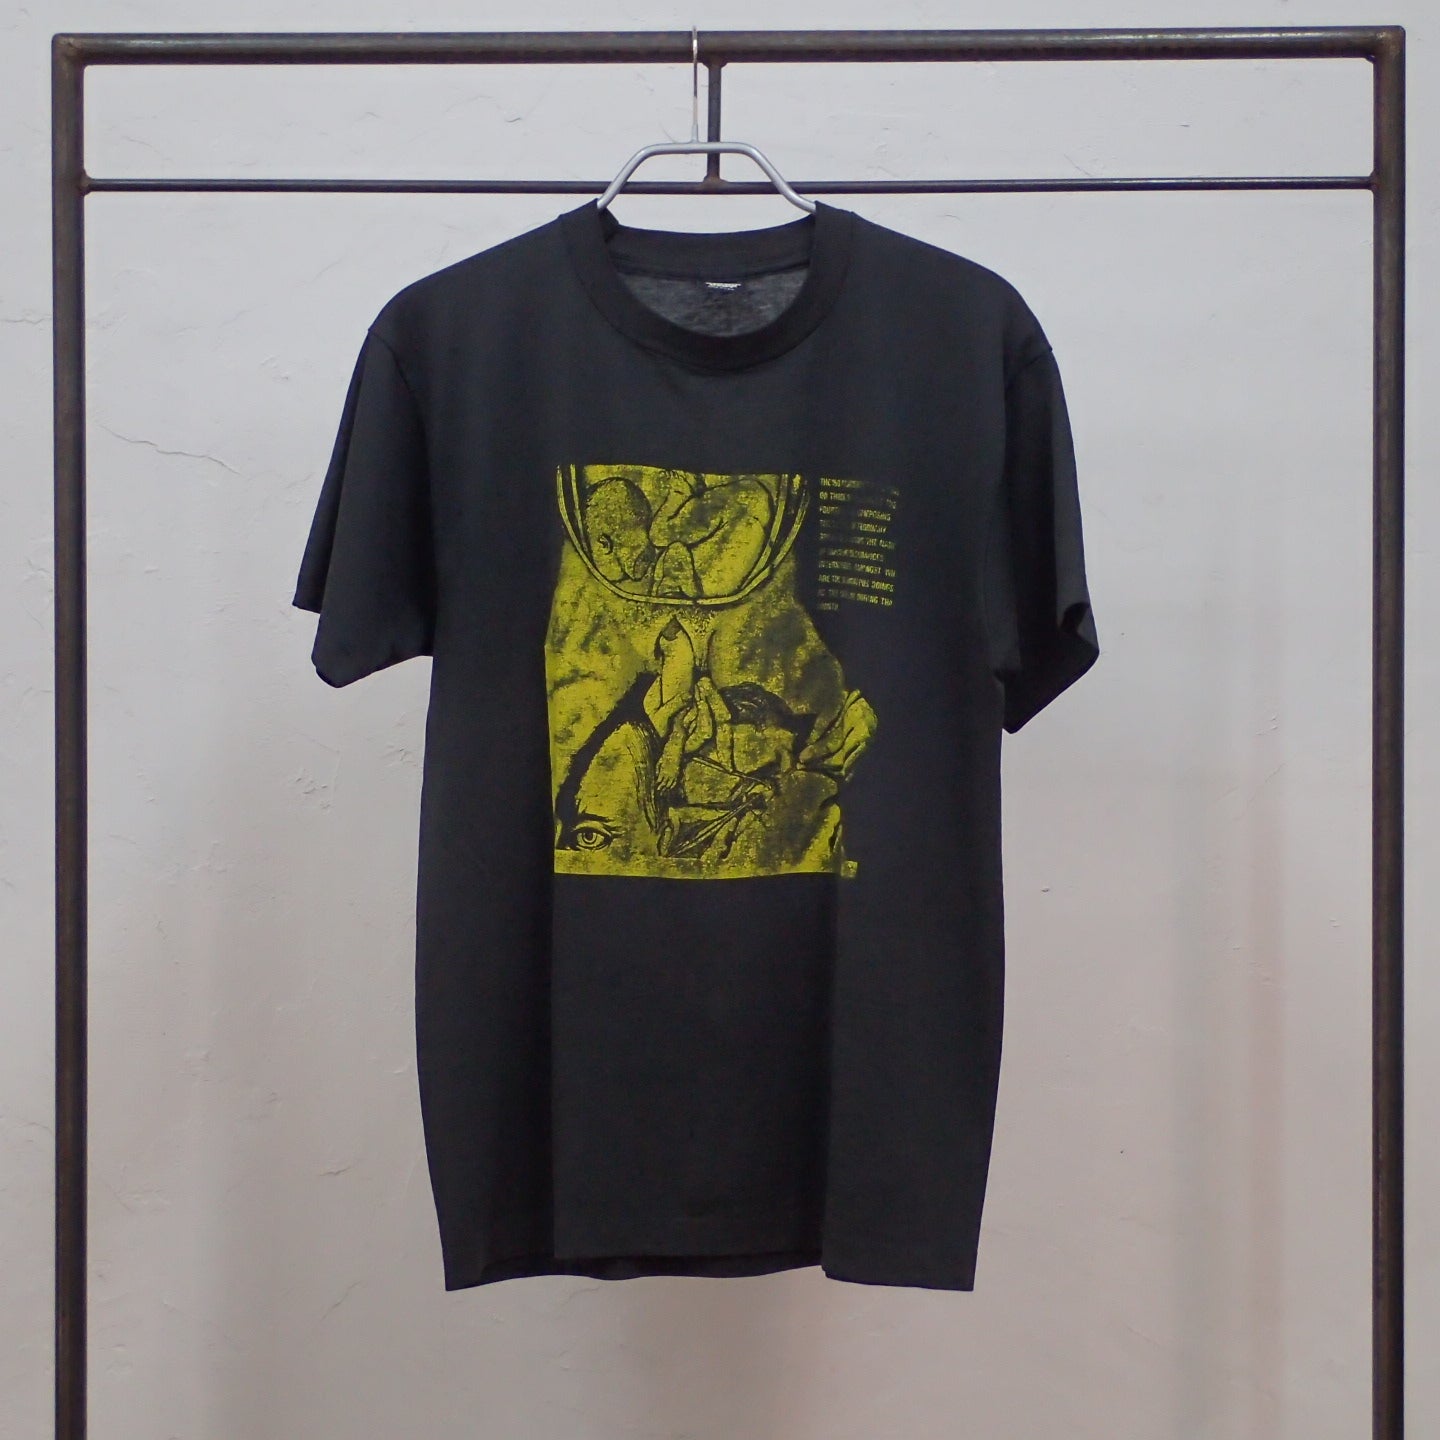 80s Nurse with Wound / Whitehouse T-shirt 